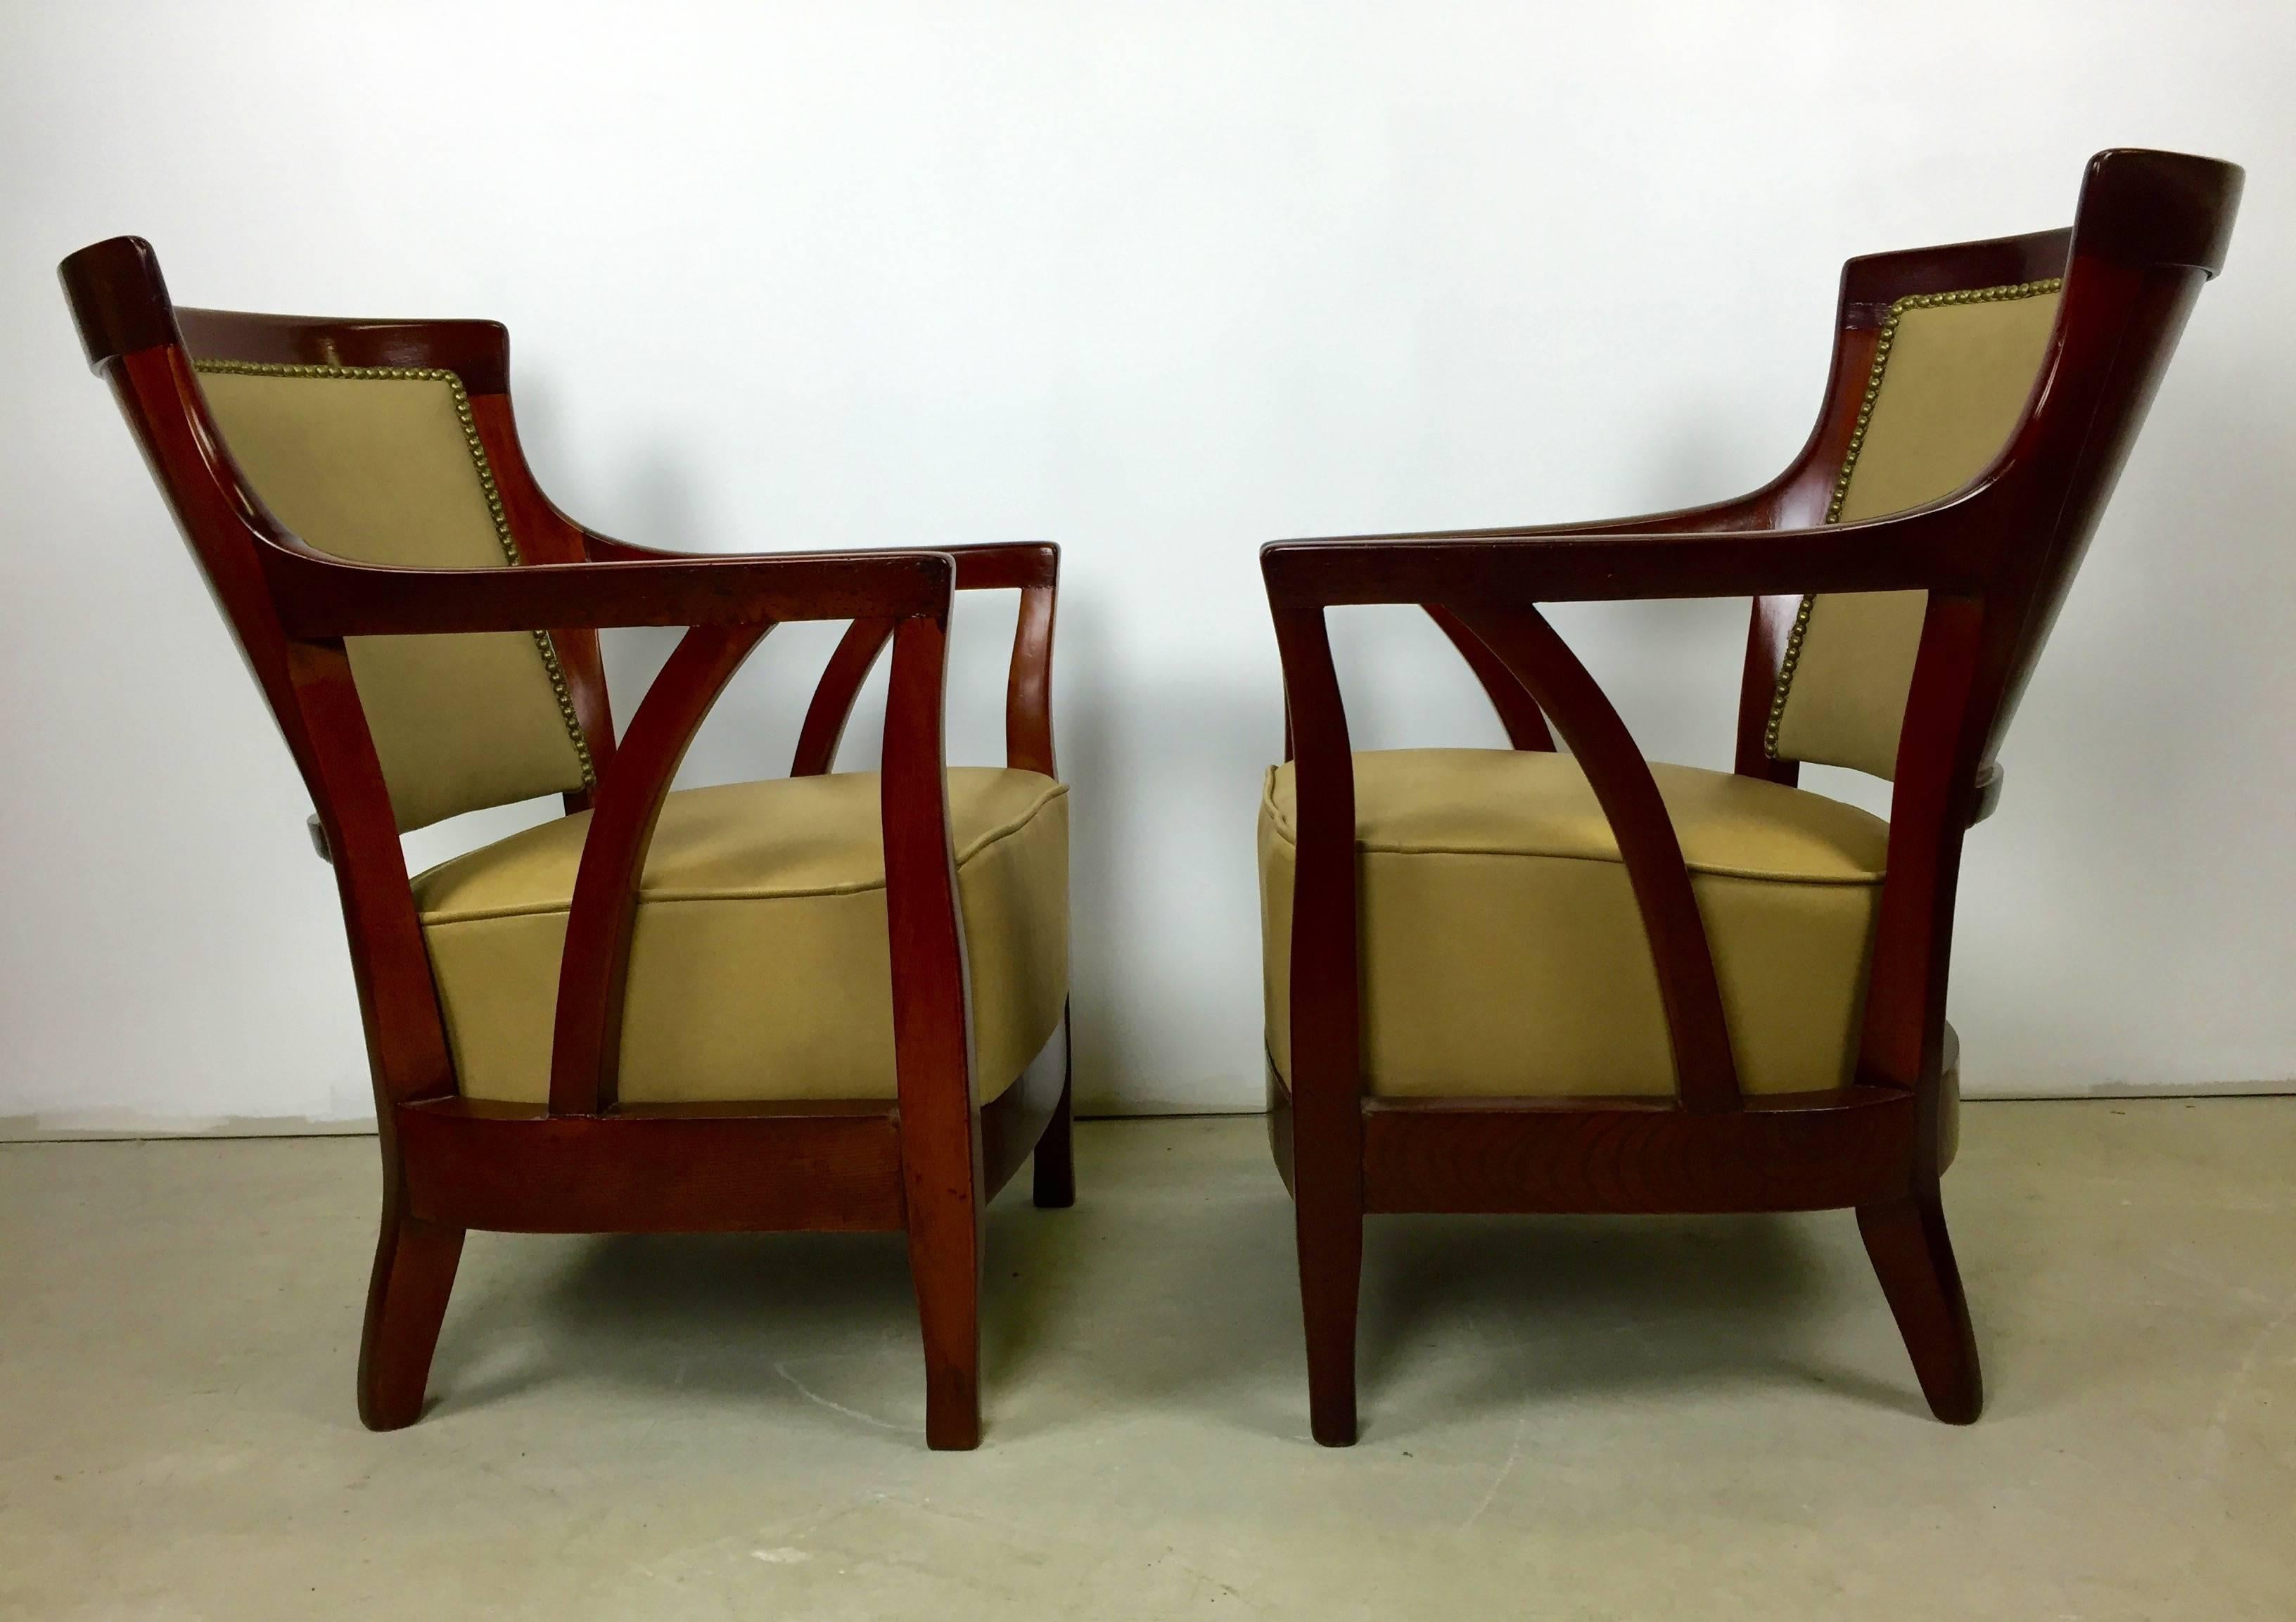 Early 20th Century Pair of Walnut and Leather Vienna Secessionist Club Chairs